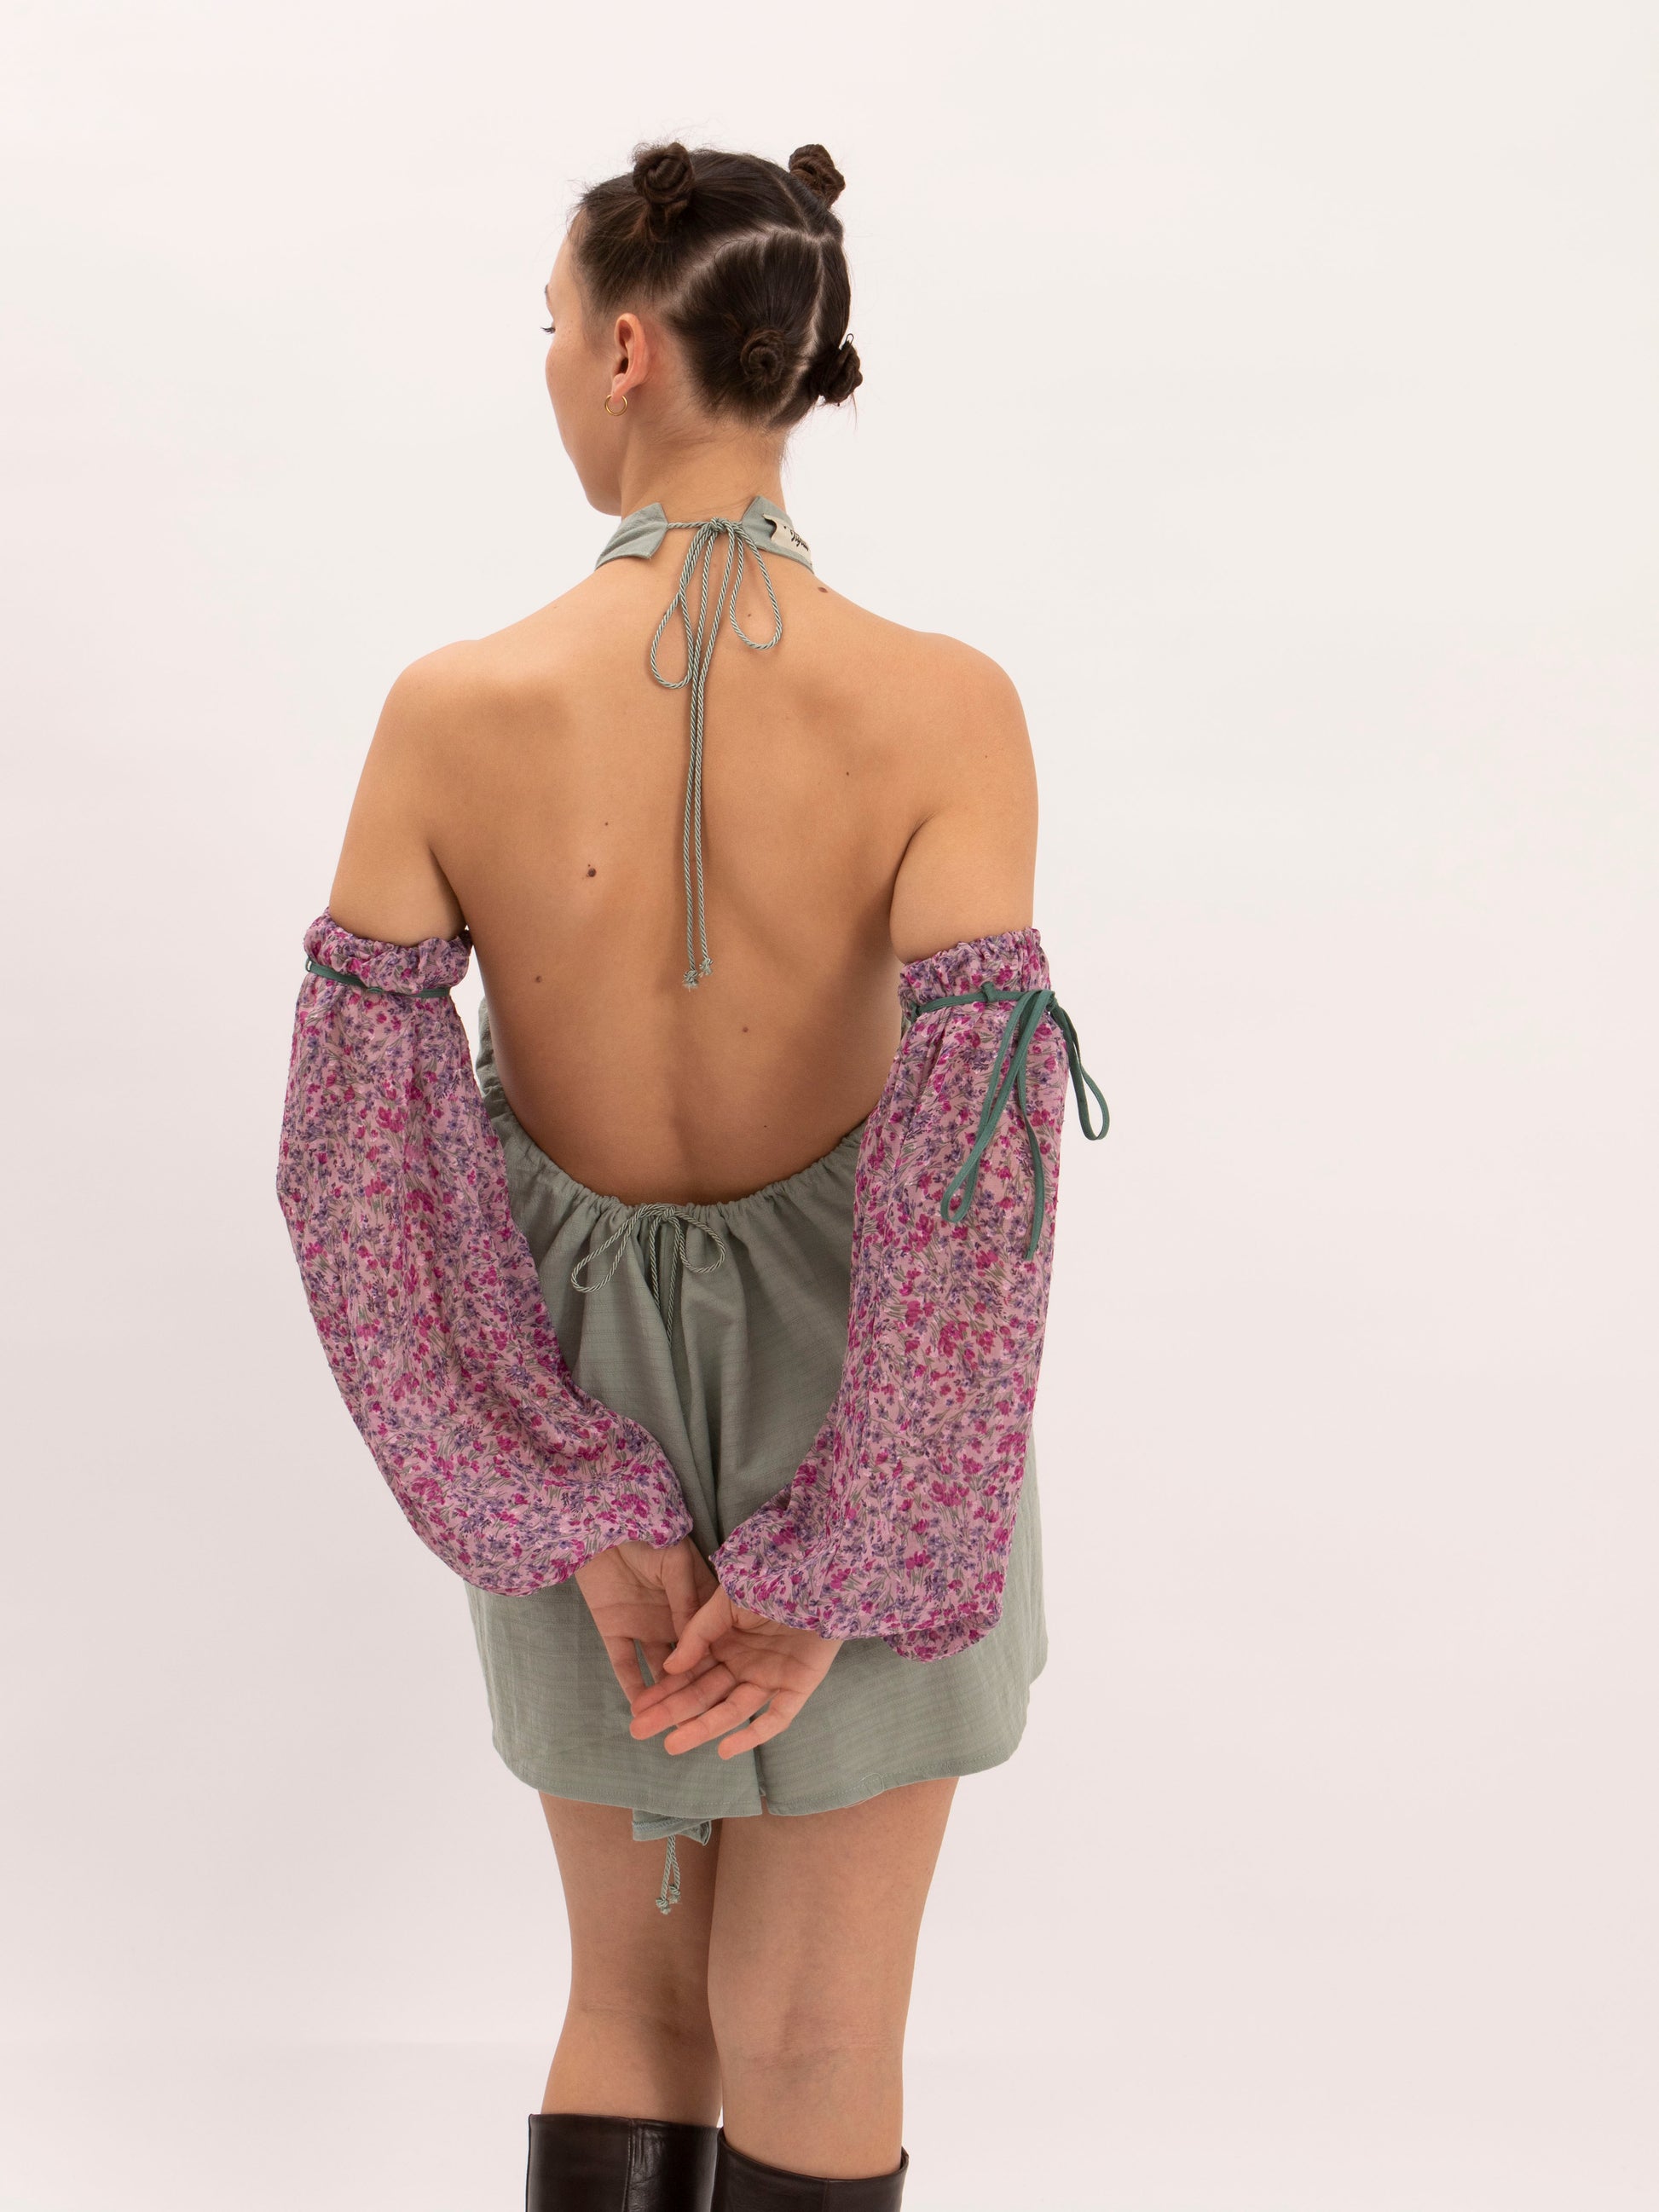 Sleeves, back view, accessory, unique